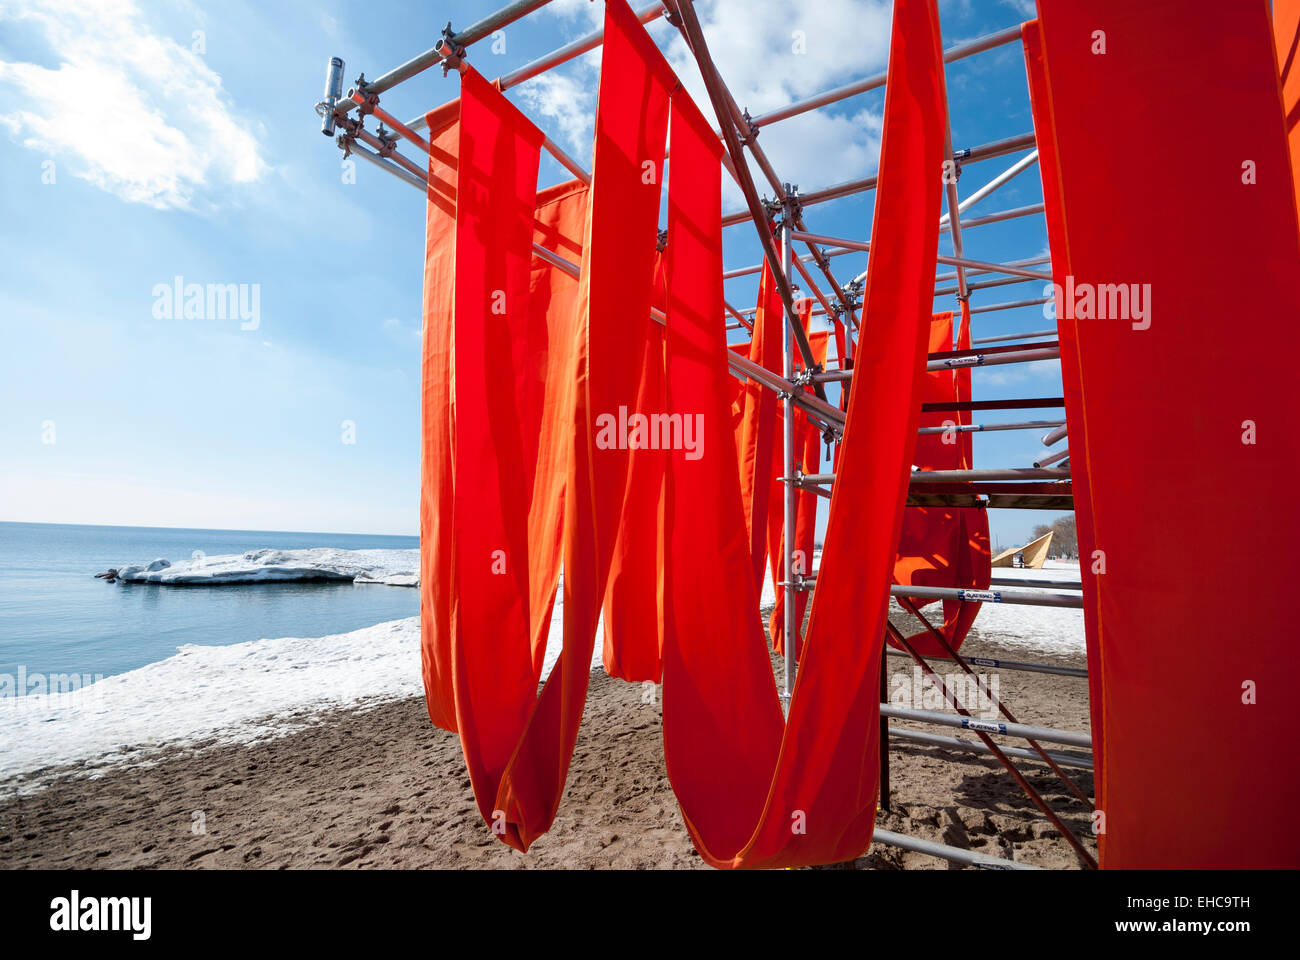 One of five functional temporary art installations built around the seasonal lifeguard stations on Kew Beach in Toronto Canada Stock Photo